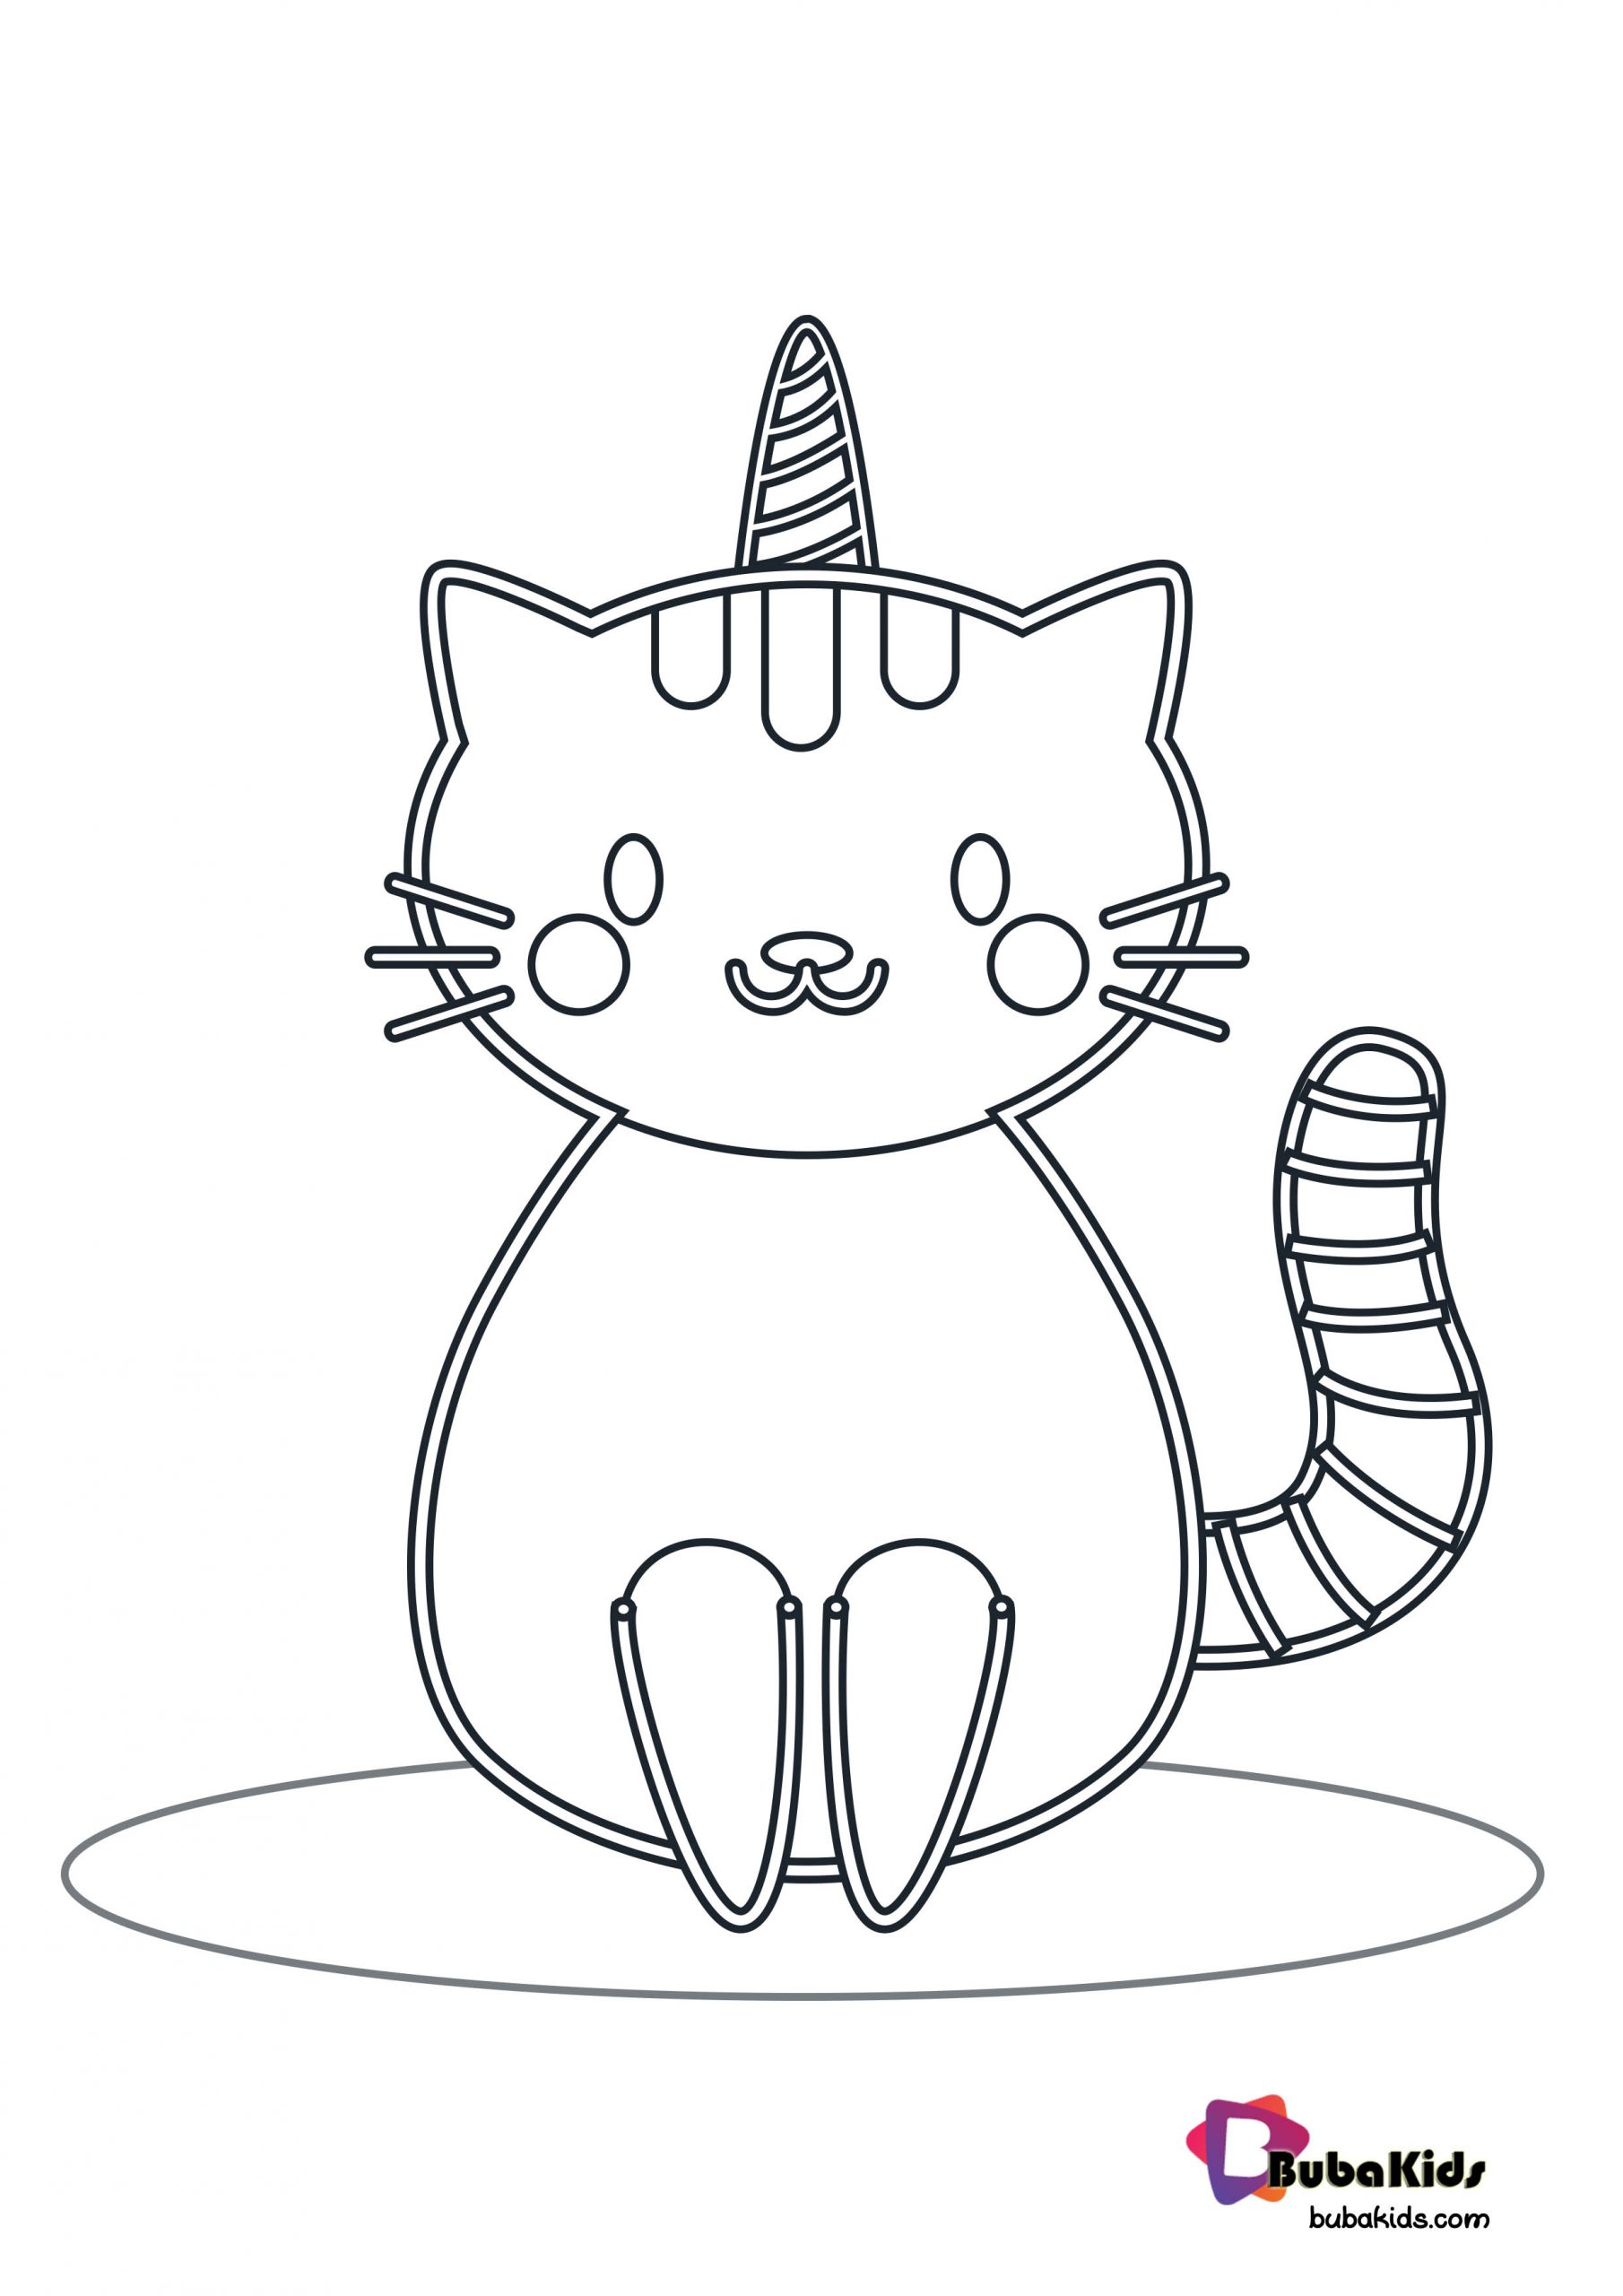 Coloring Sheet Unicorn Cat Coloring Pages Unicorn Coloring Pages 